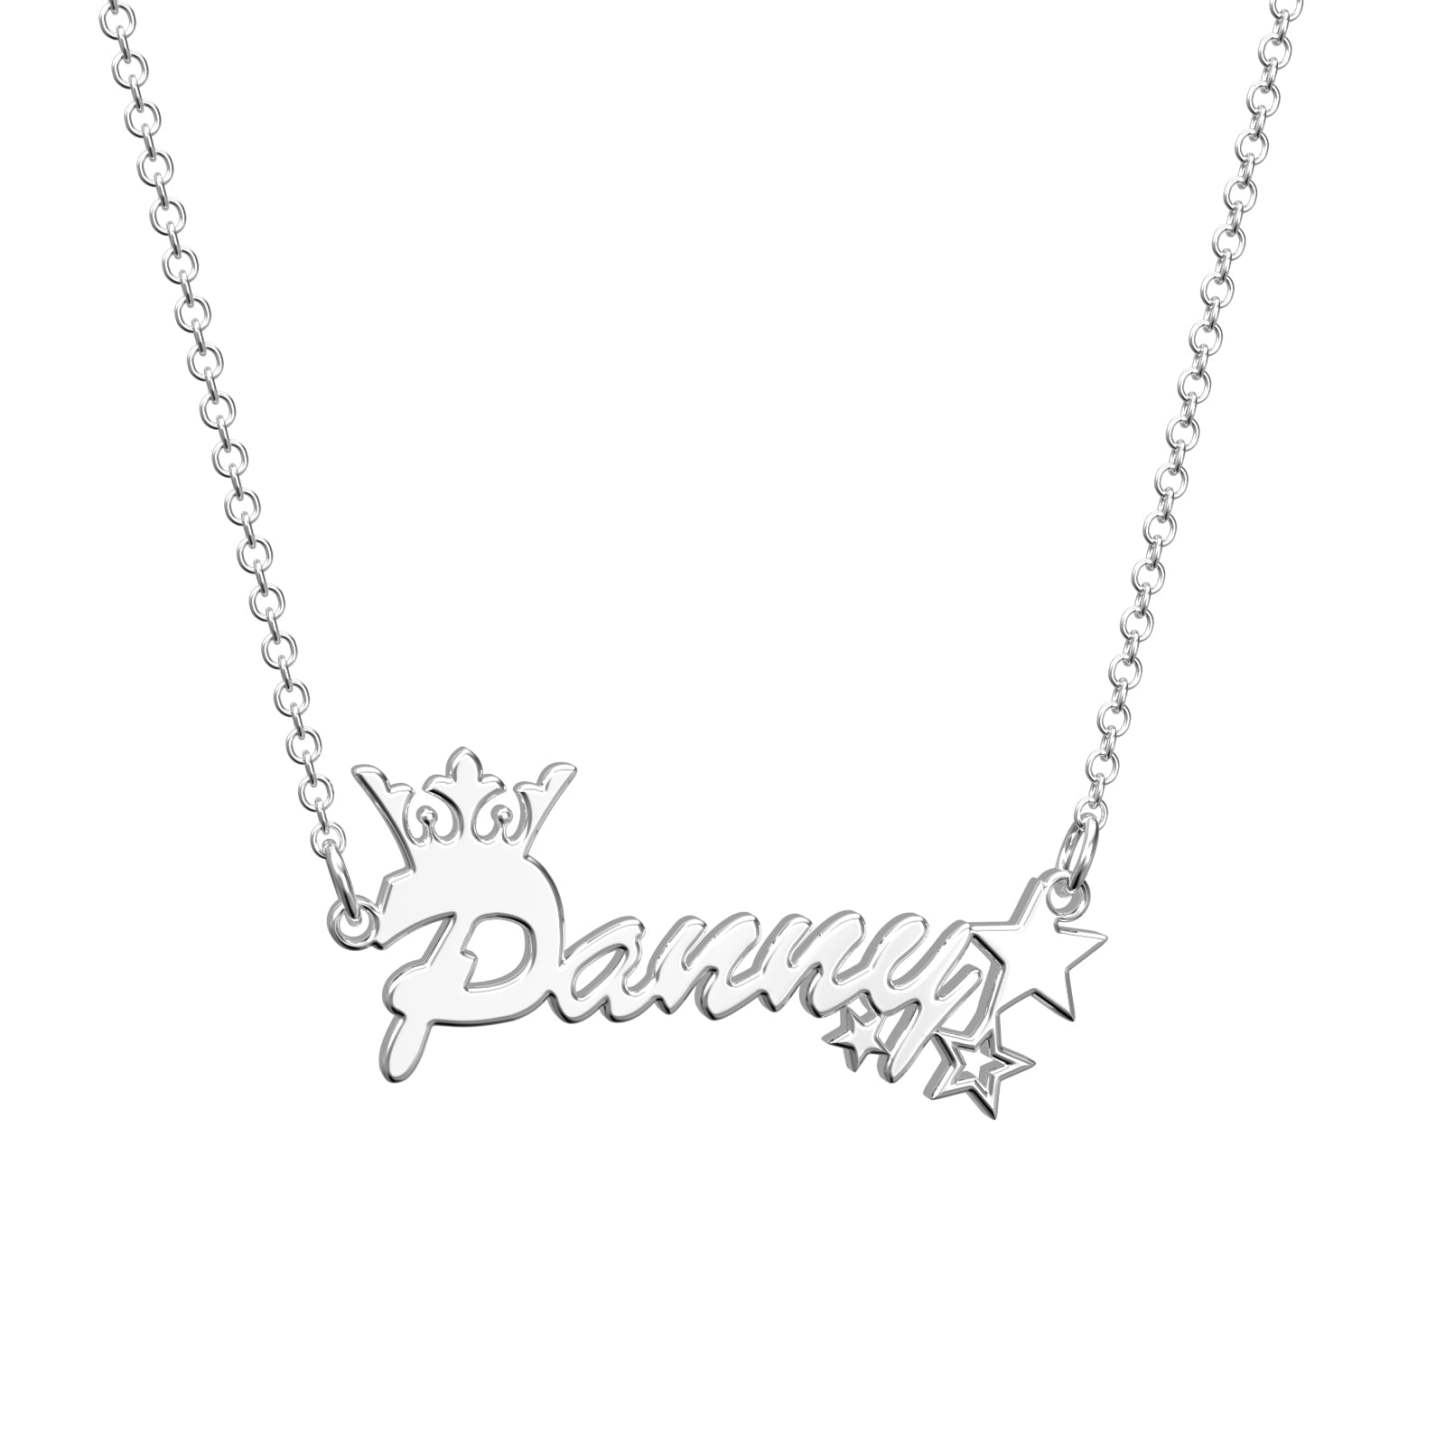 Custom Name Necklace Crown and Stars Necklace Shining Little Princess - 